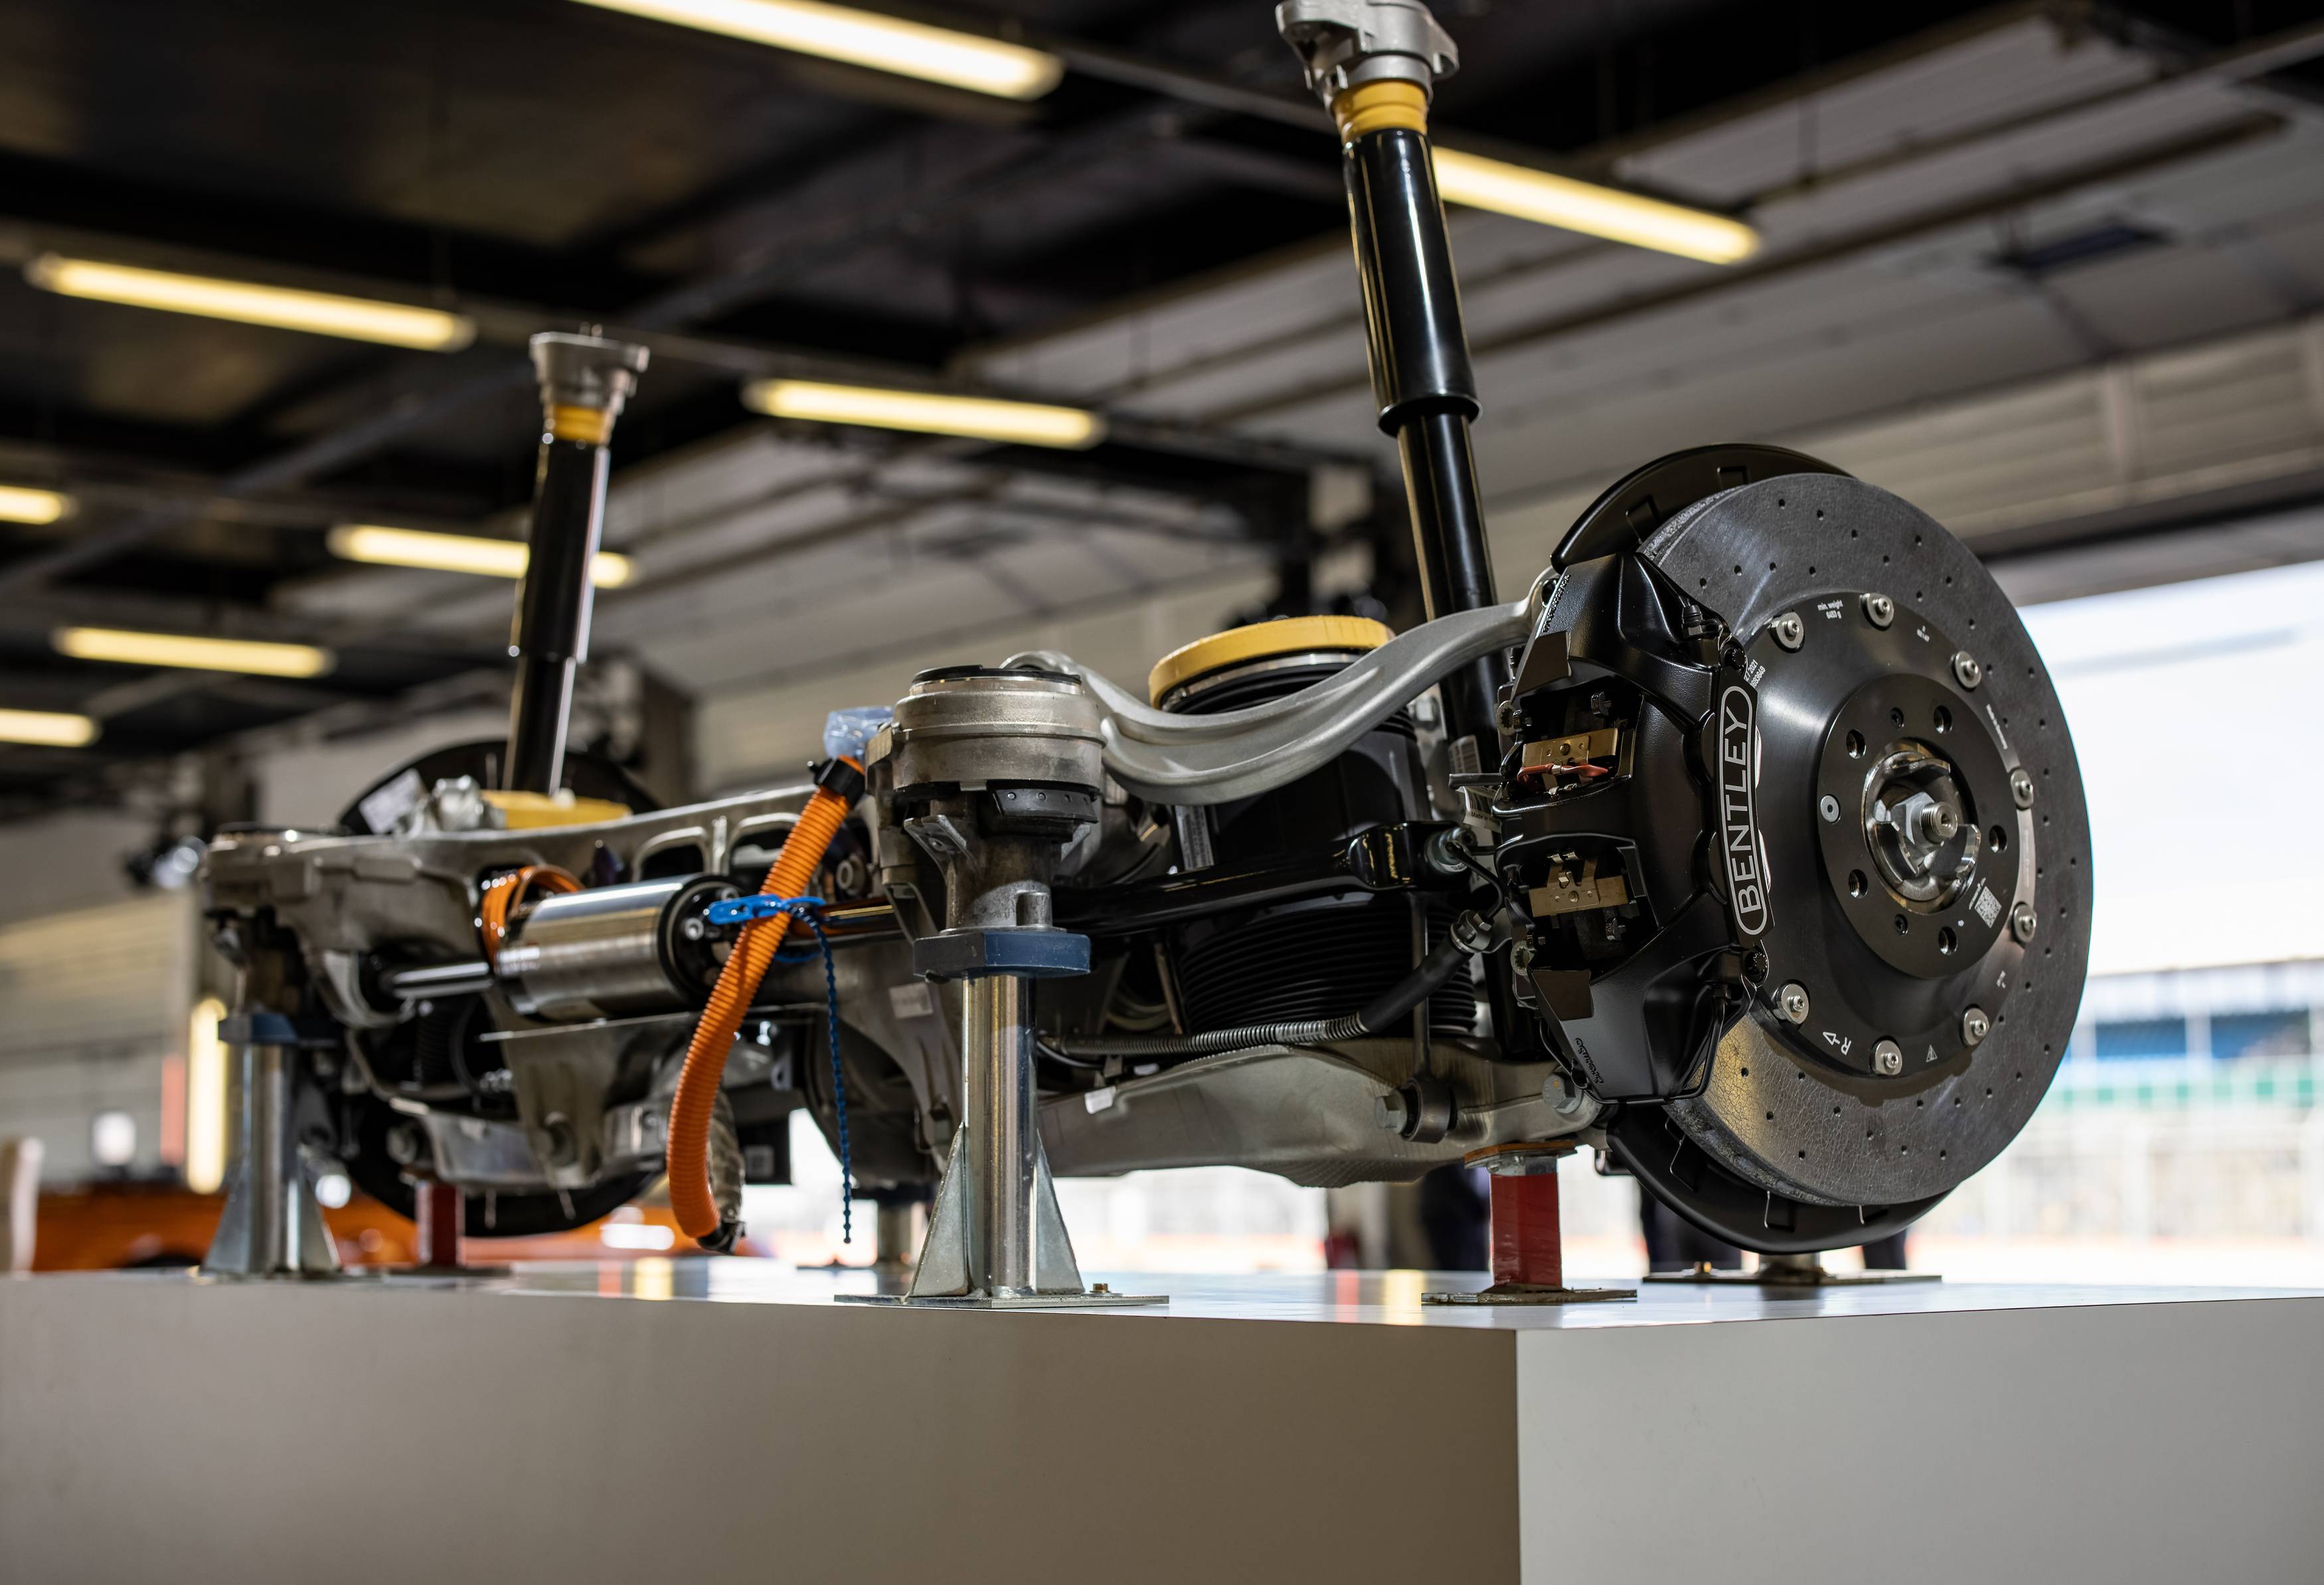 The most advanced bentley chassis yet